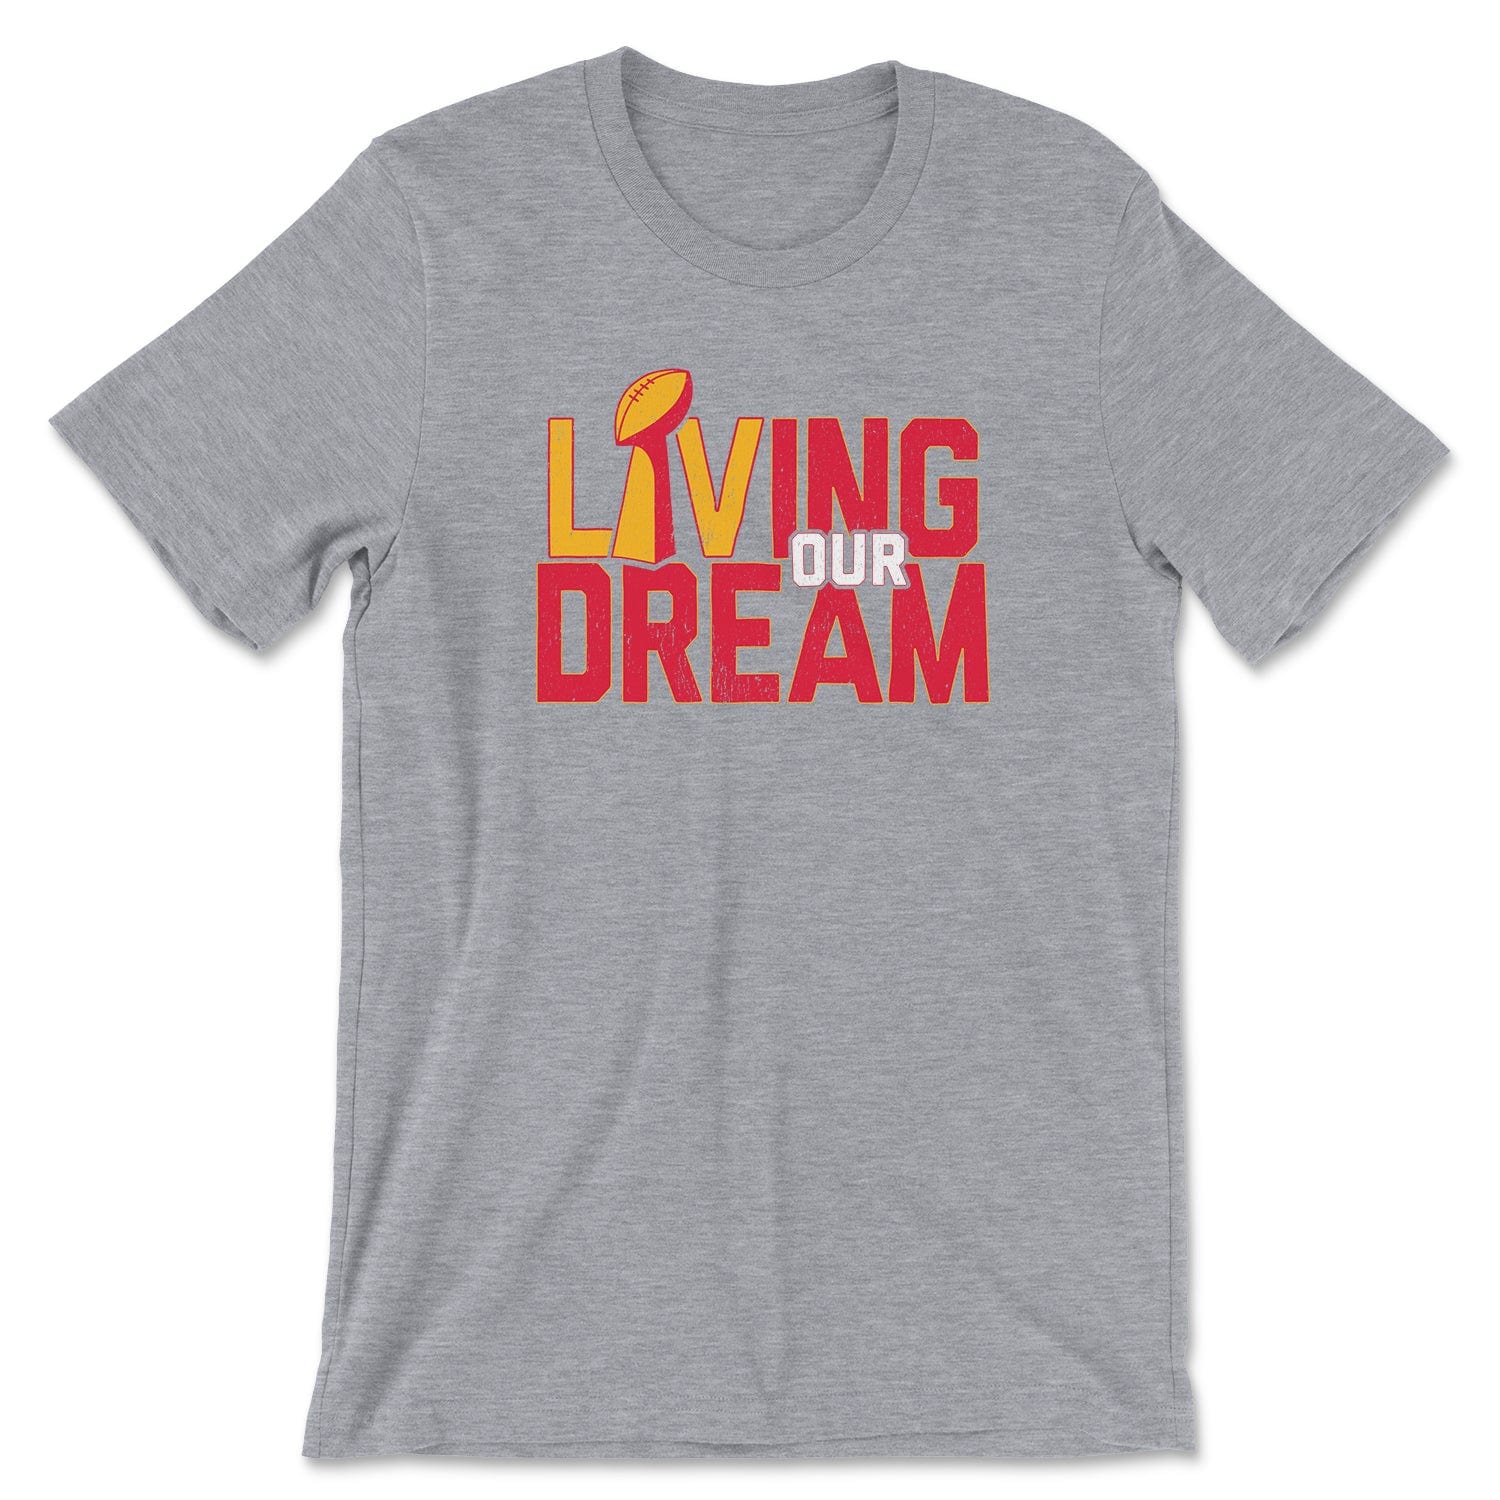 KC Swag Kansas City Chiefs red/yellow/white L(Lombardi trophy)IVING OUR DREAM on athletic heather grey t-shirt